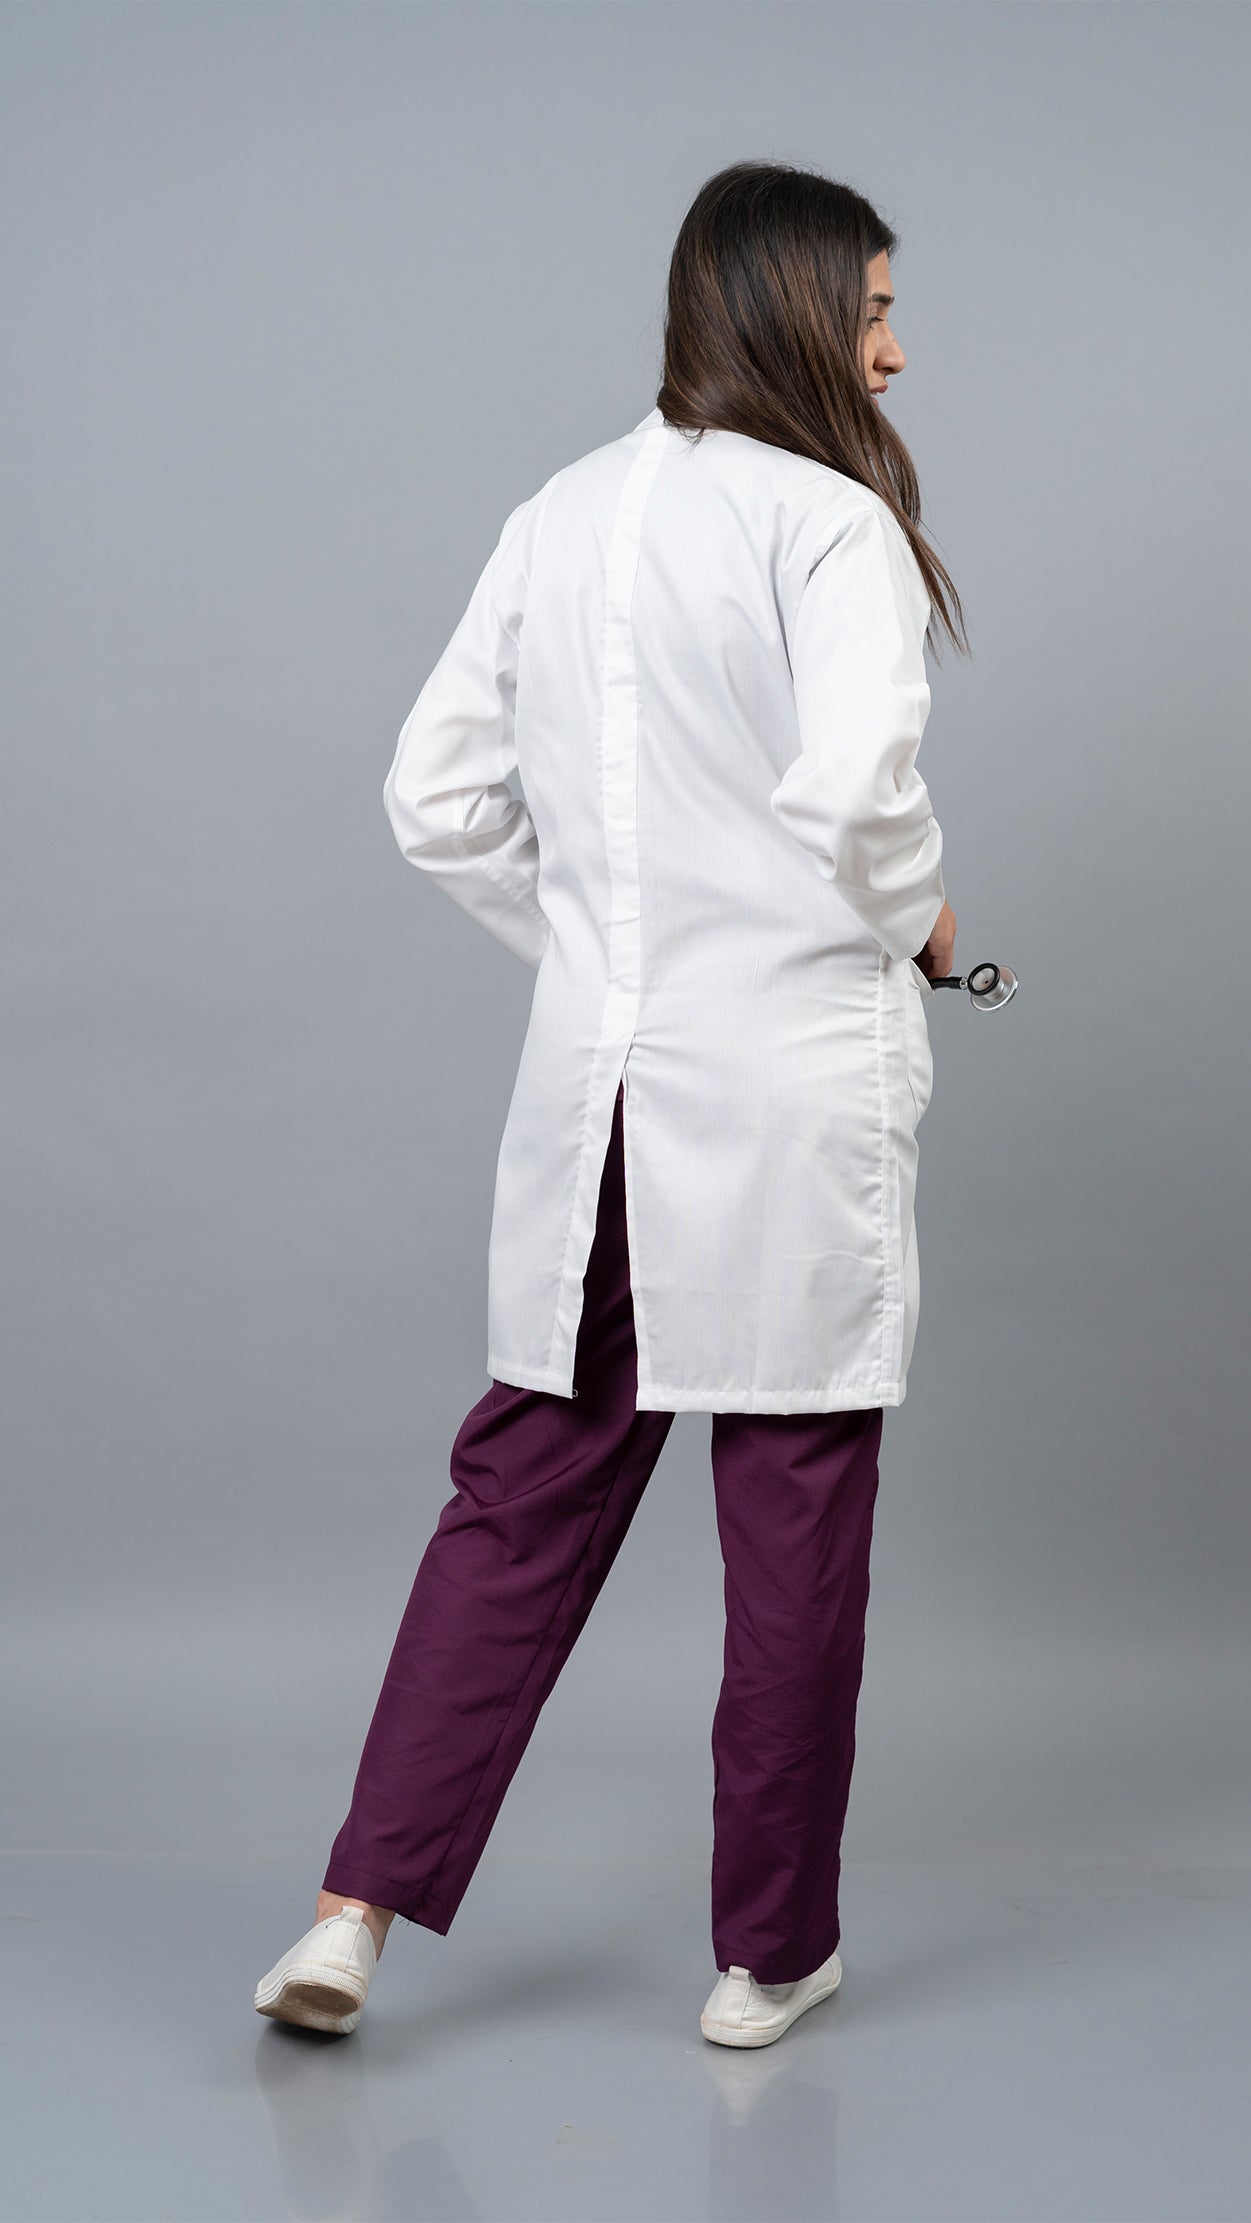 VastraMedwear Full Sleeves Knee length Lab Coat/Apron for Chemistry Lab and Medical Students Women